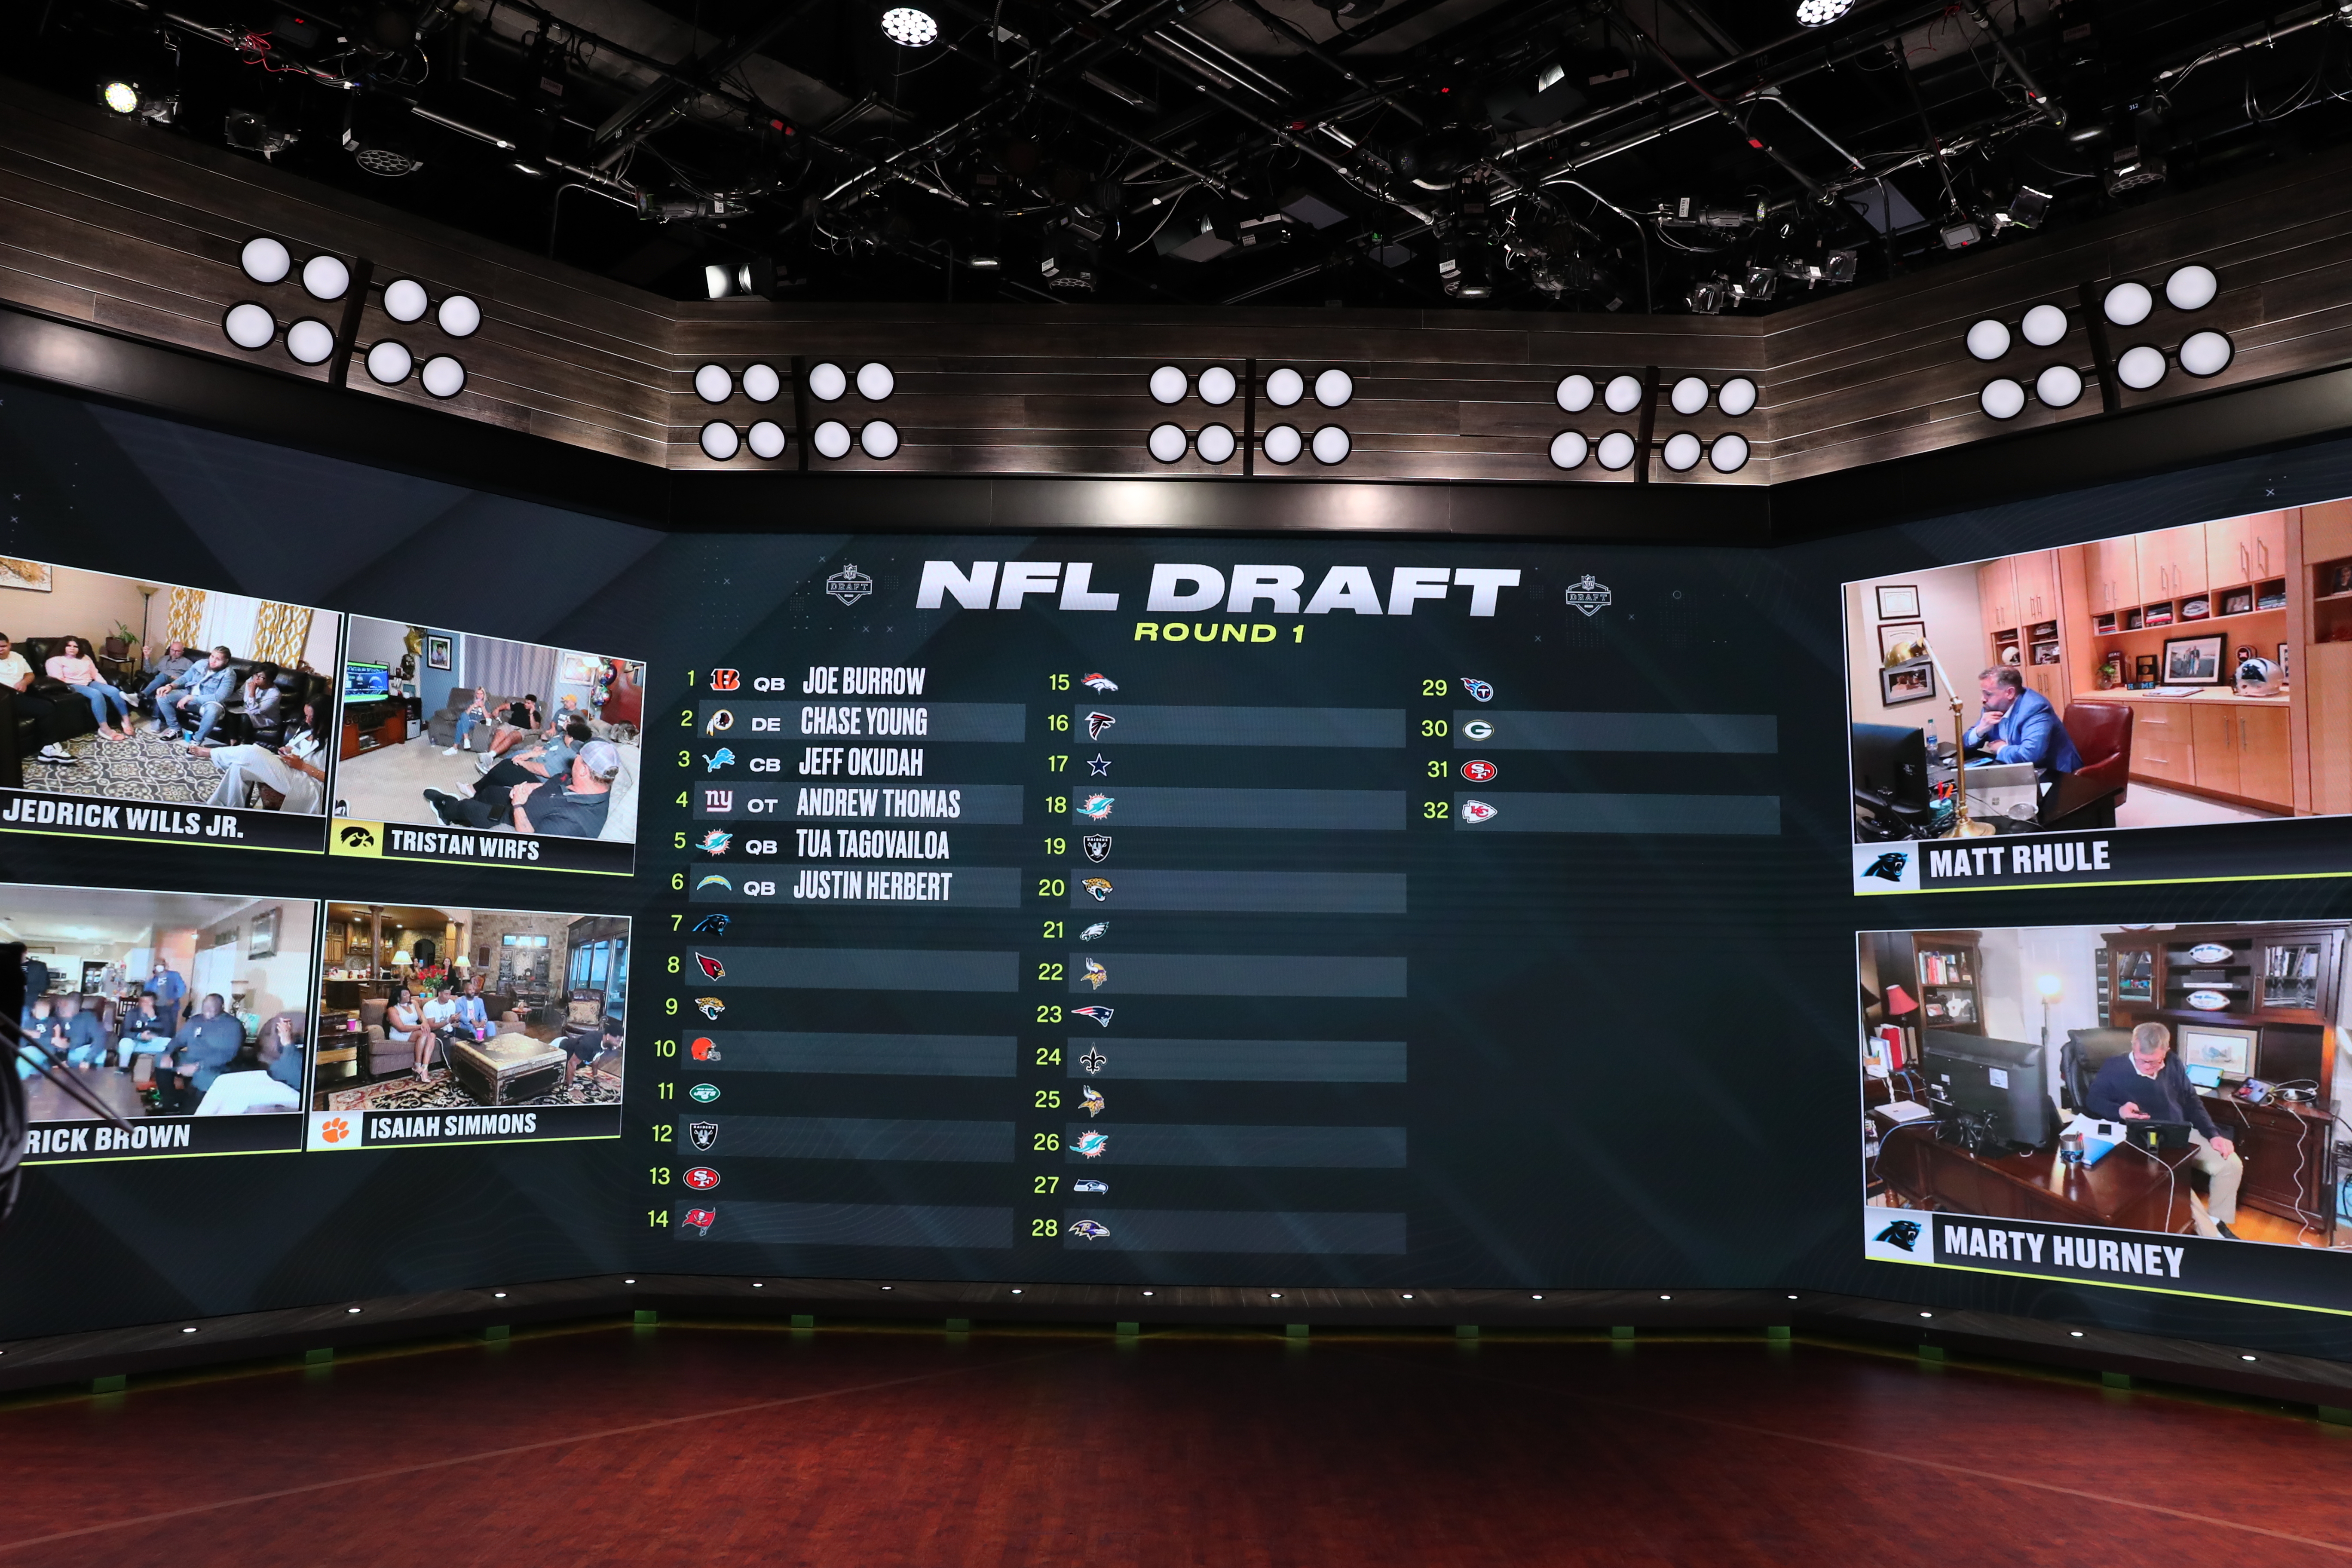 live stream of the nfl draft